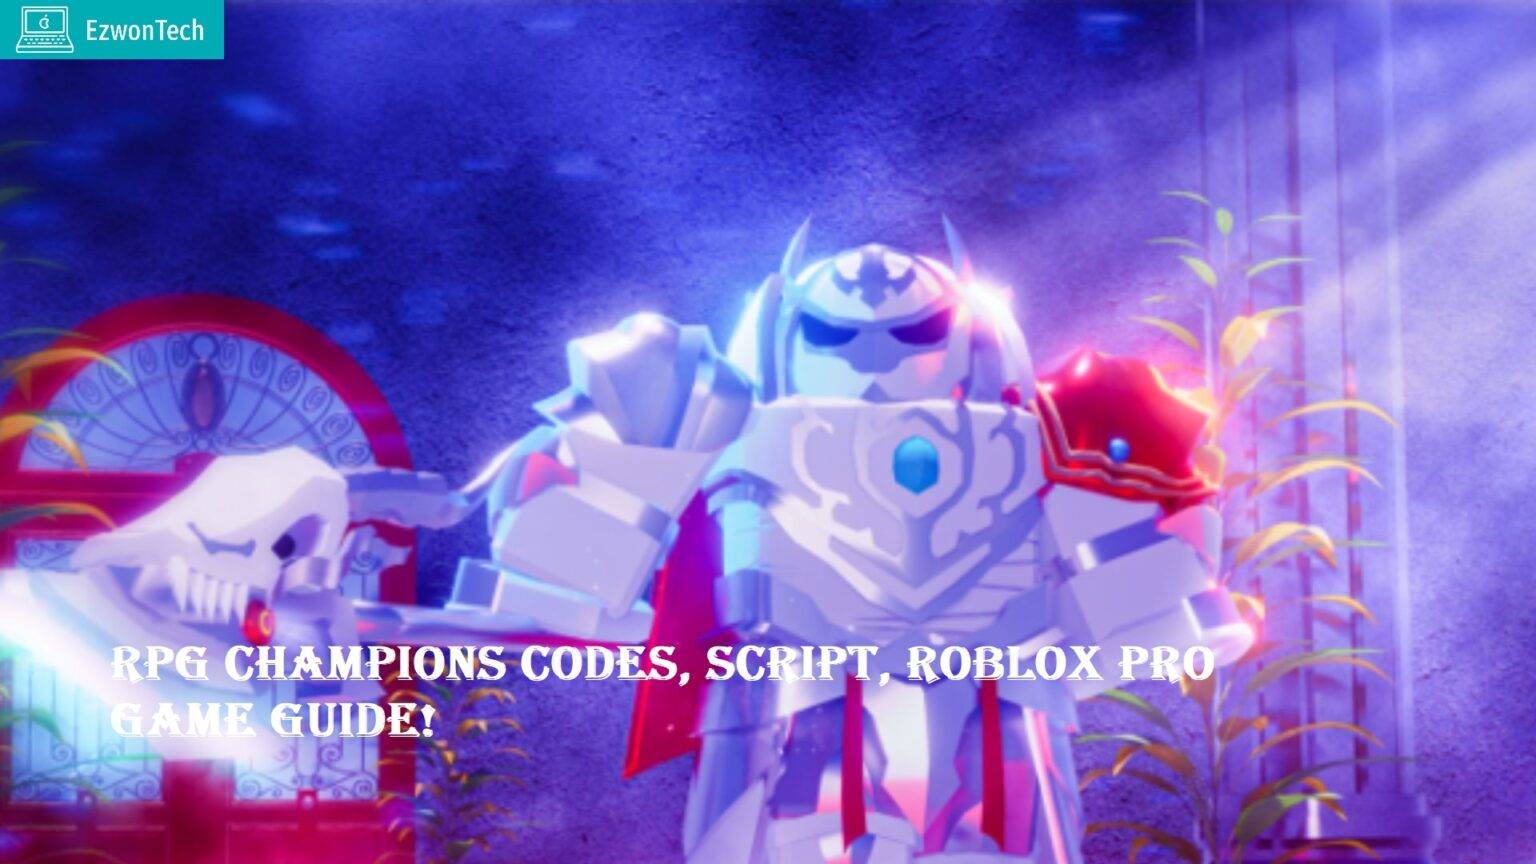 RPG Champions Codes, Script, Roblox Pro Game Guide!